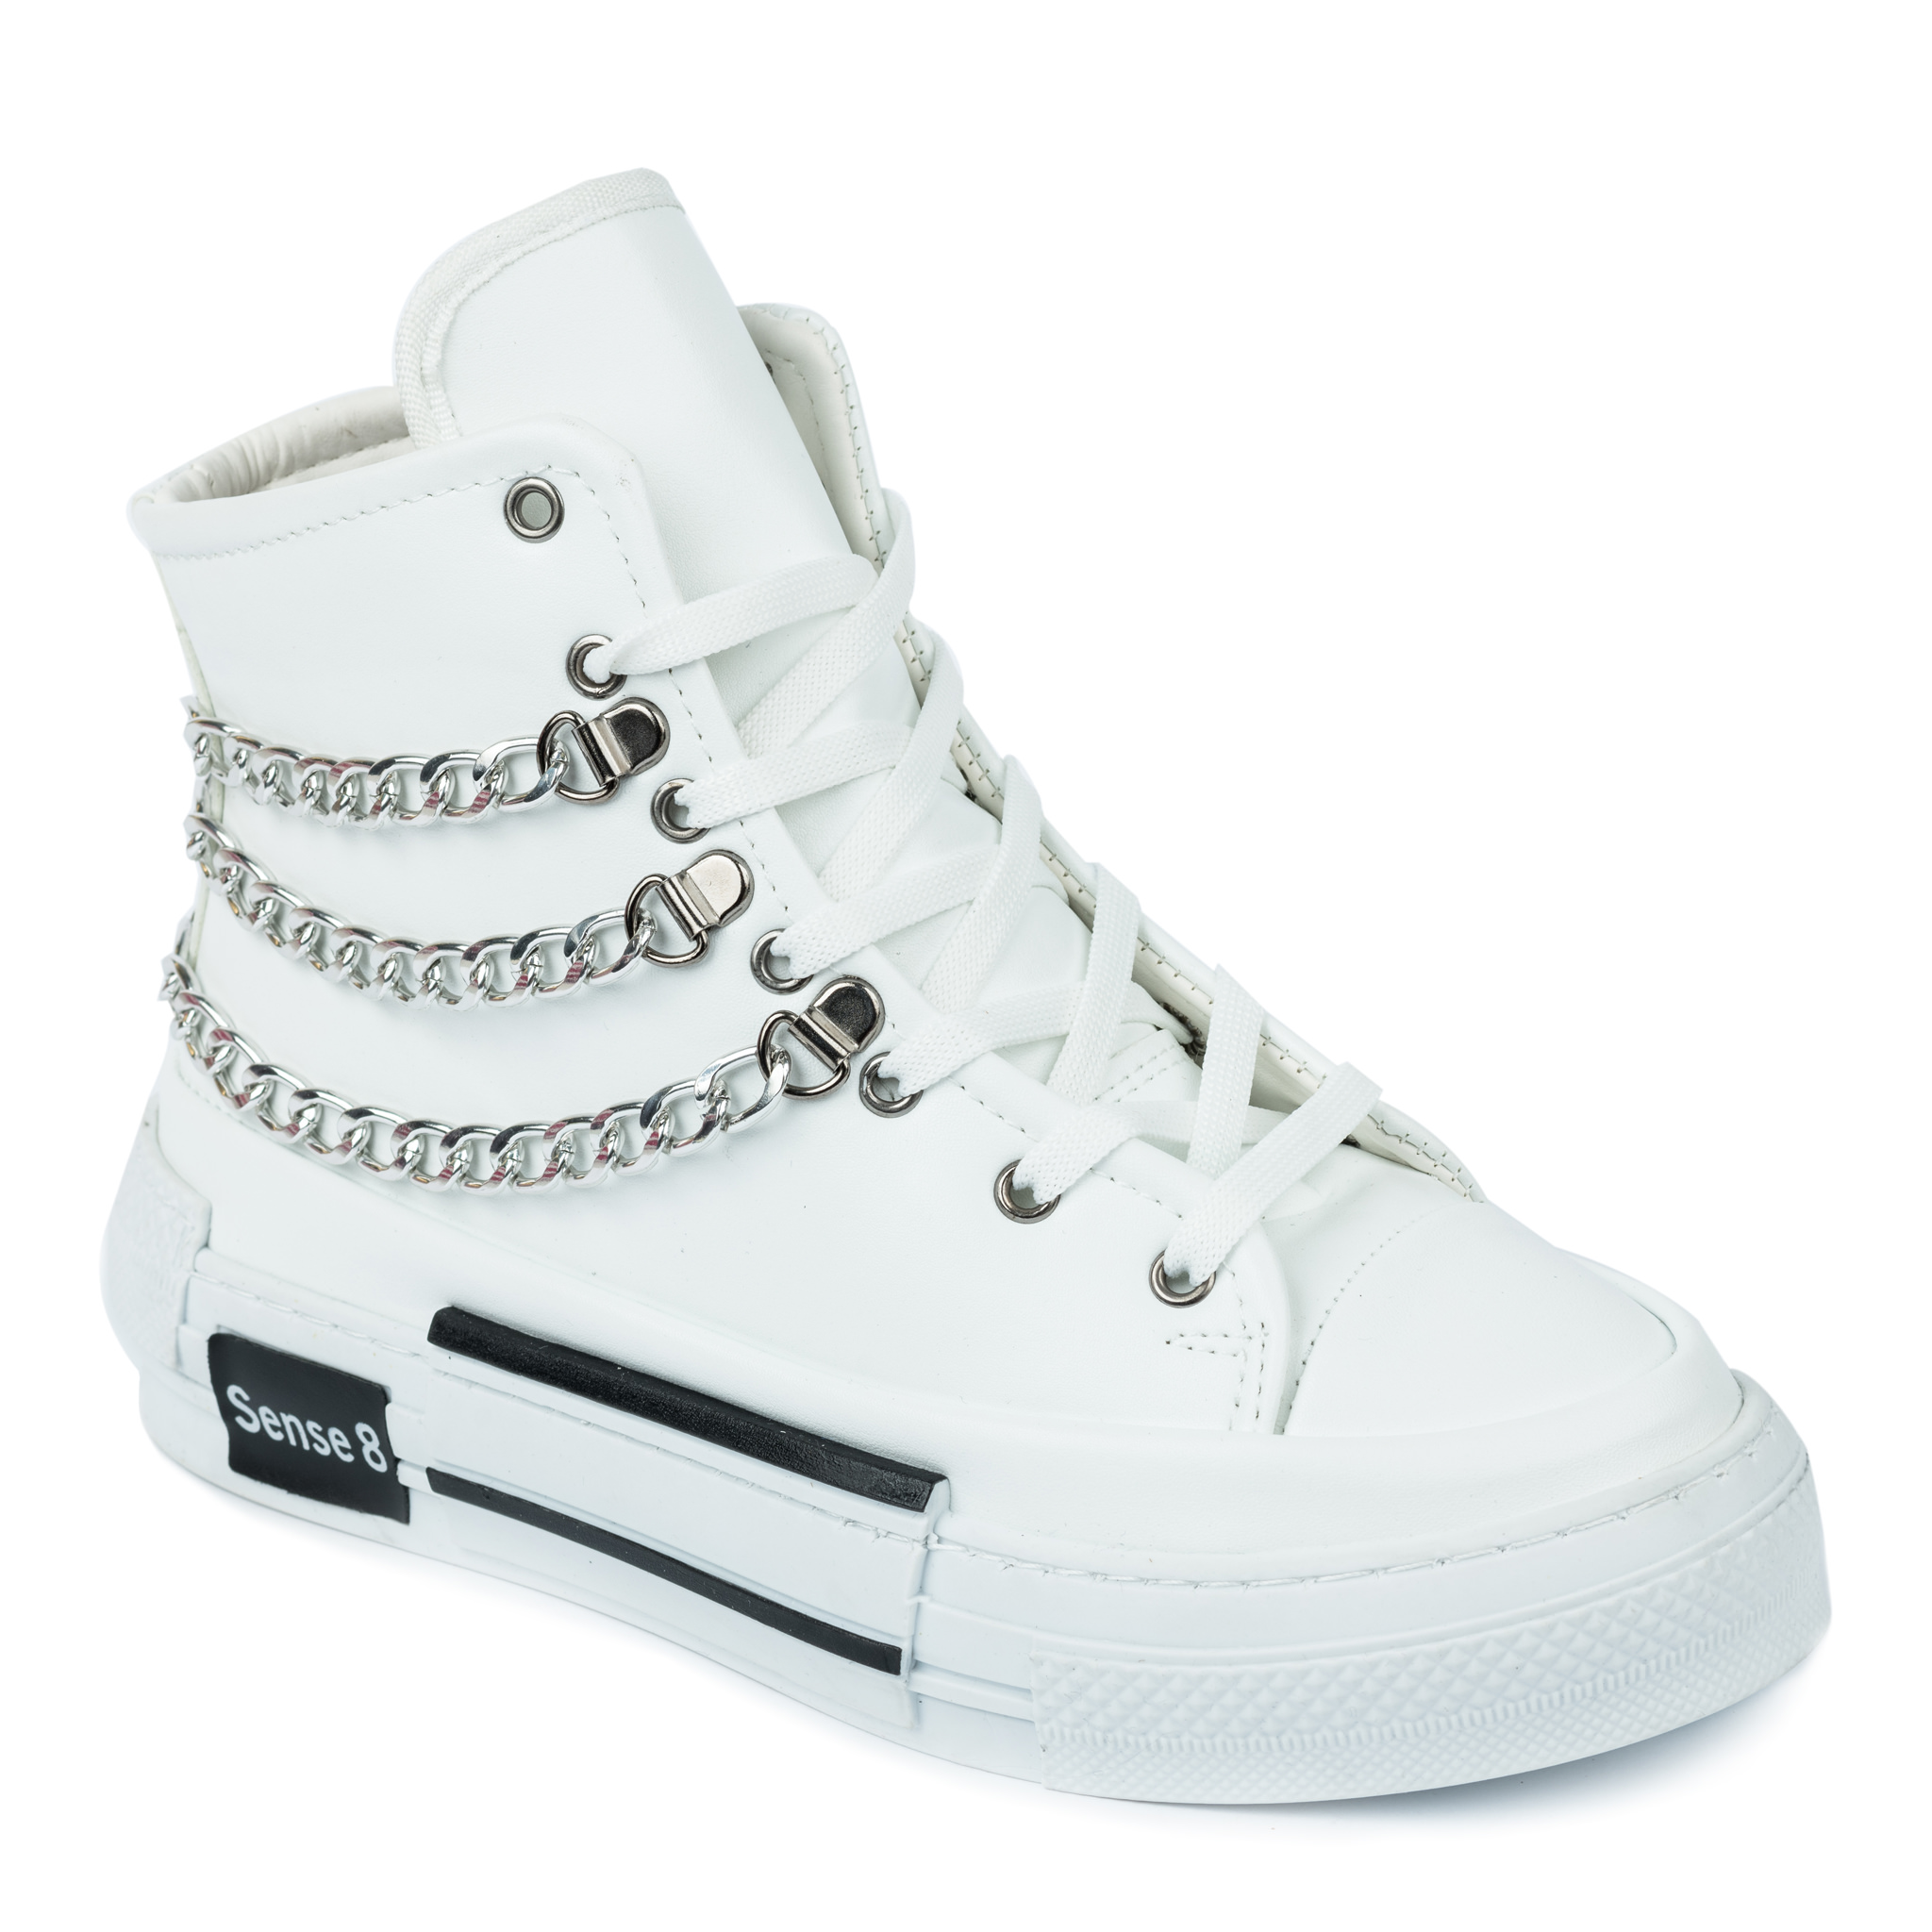 ANKLE SNEAKERS WITH CHAIN - WHITE